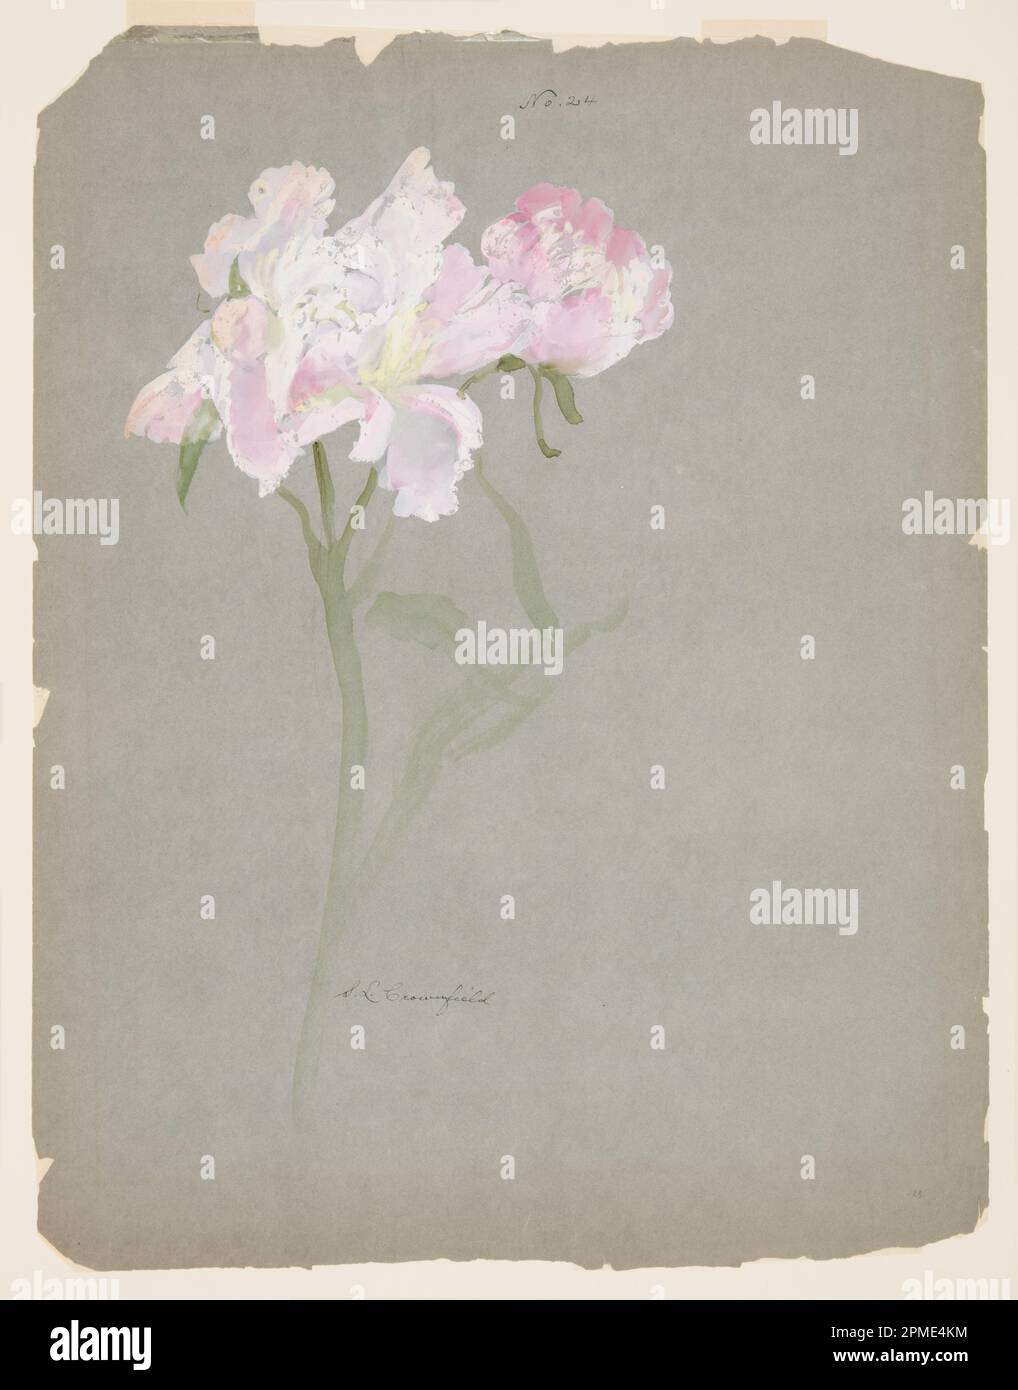 Drawing, Study of Peony Stalk with Blossoms; Designed by Sophia L. Crownfield (American, 1862–1929); USA; brush and gouache, graphite on gray paper; 64.8 × 50 cm (25 1/2 × 19 11/16 in.) Mat: 71.1 × 55.9 cm (28 × 22 in.) Stock Photo